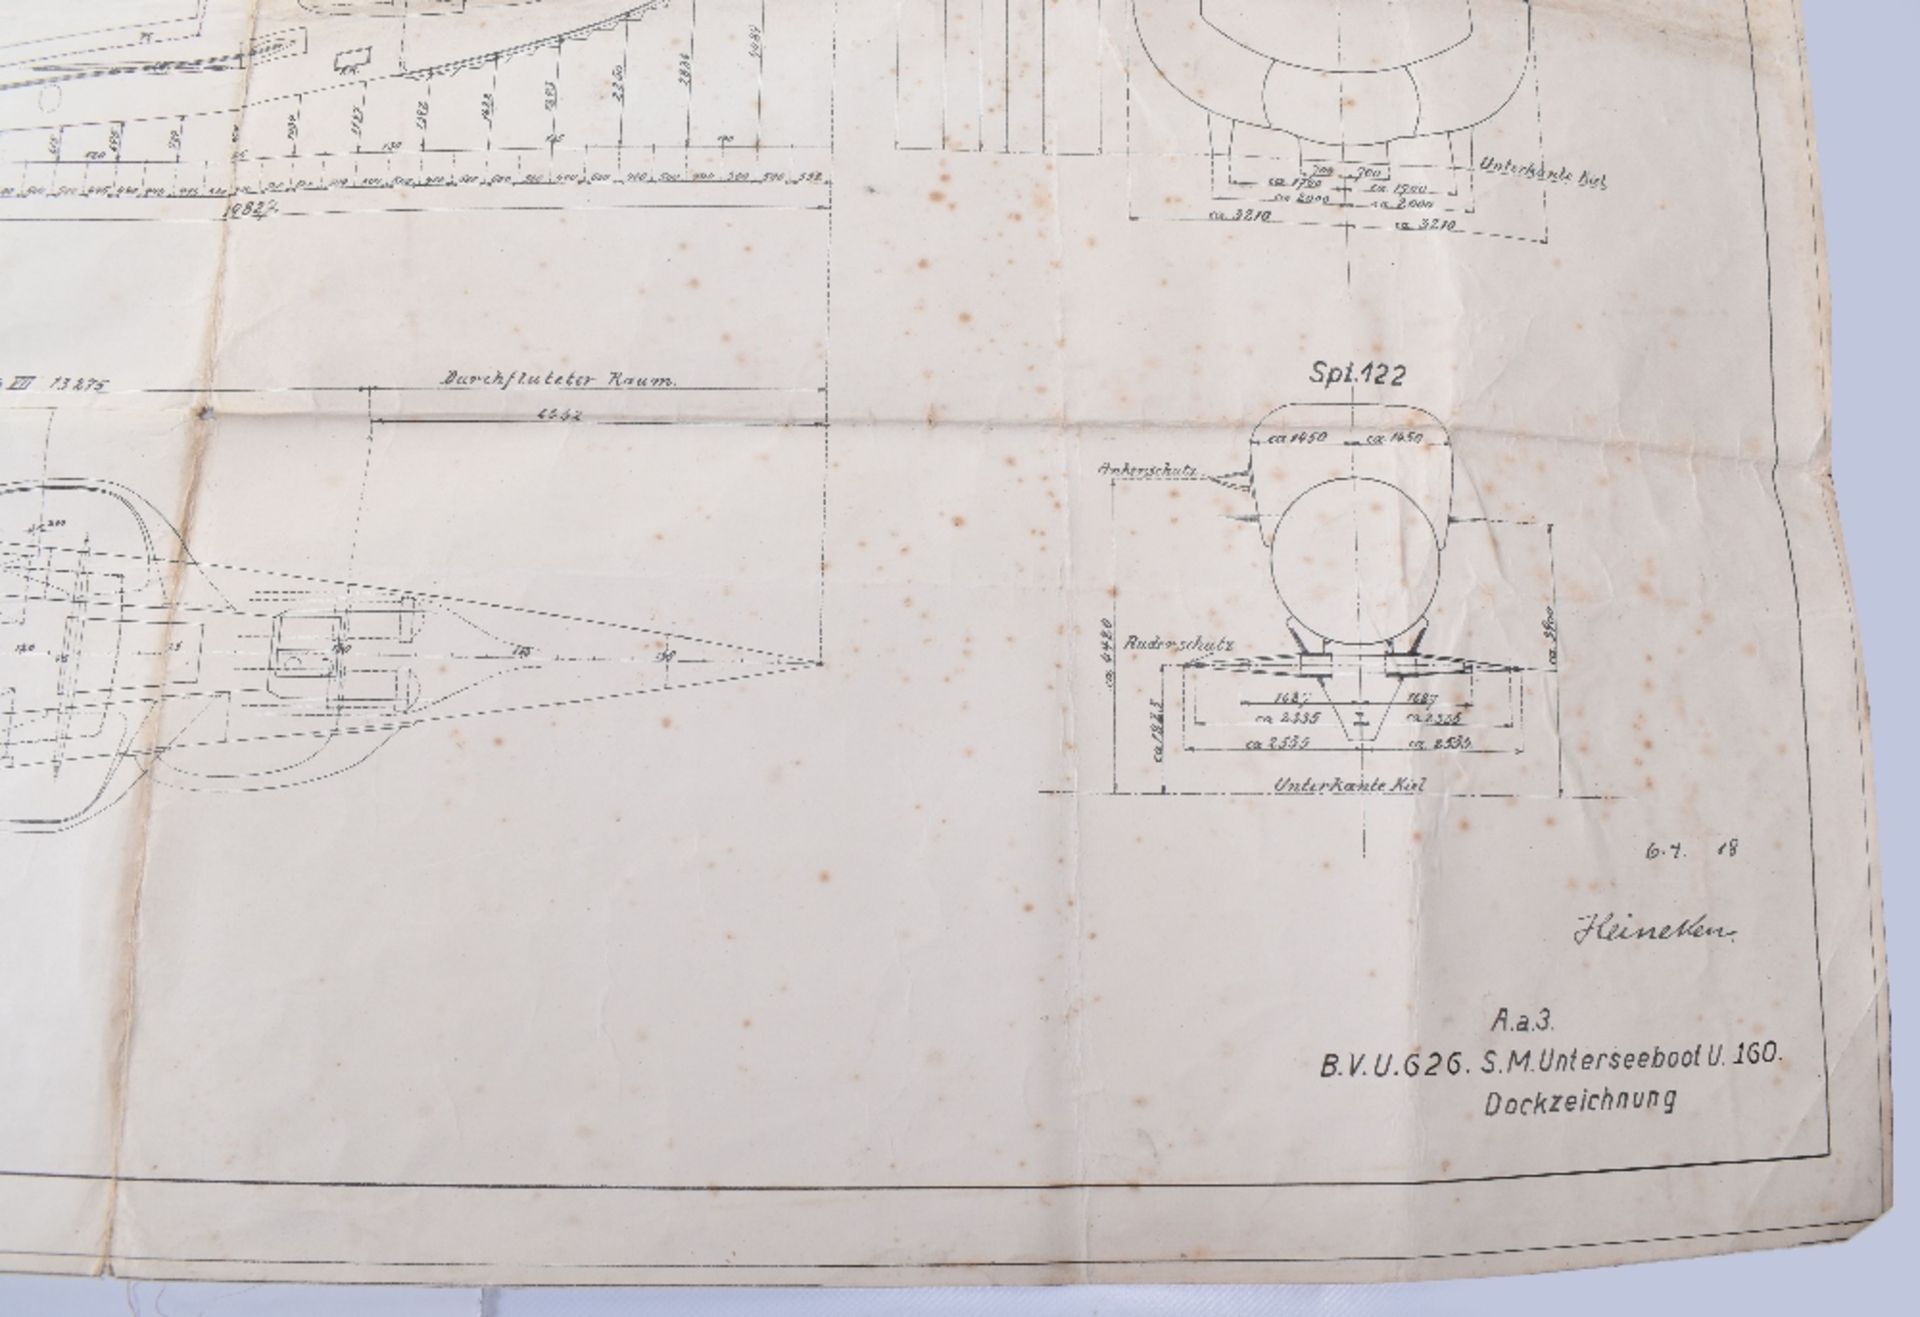 Rare Full Technical Specification Plans of Imperial German U-Boat U-160 - Image 4 of 8